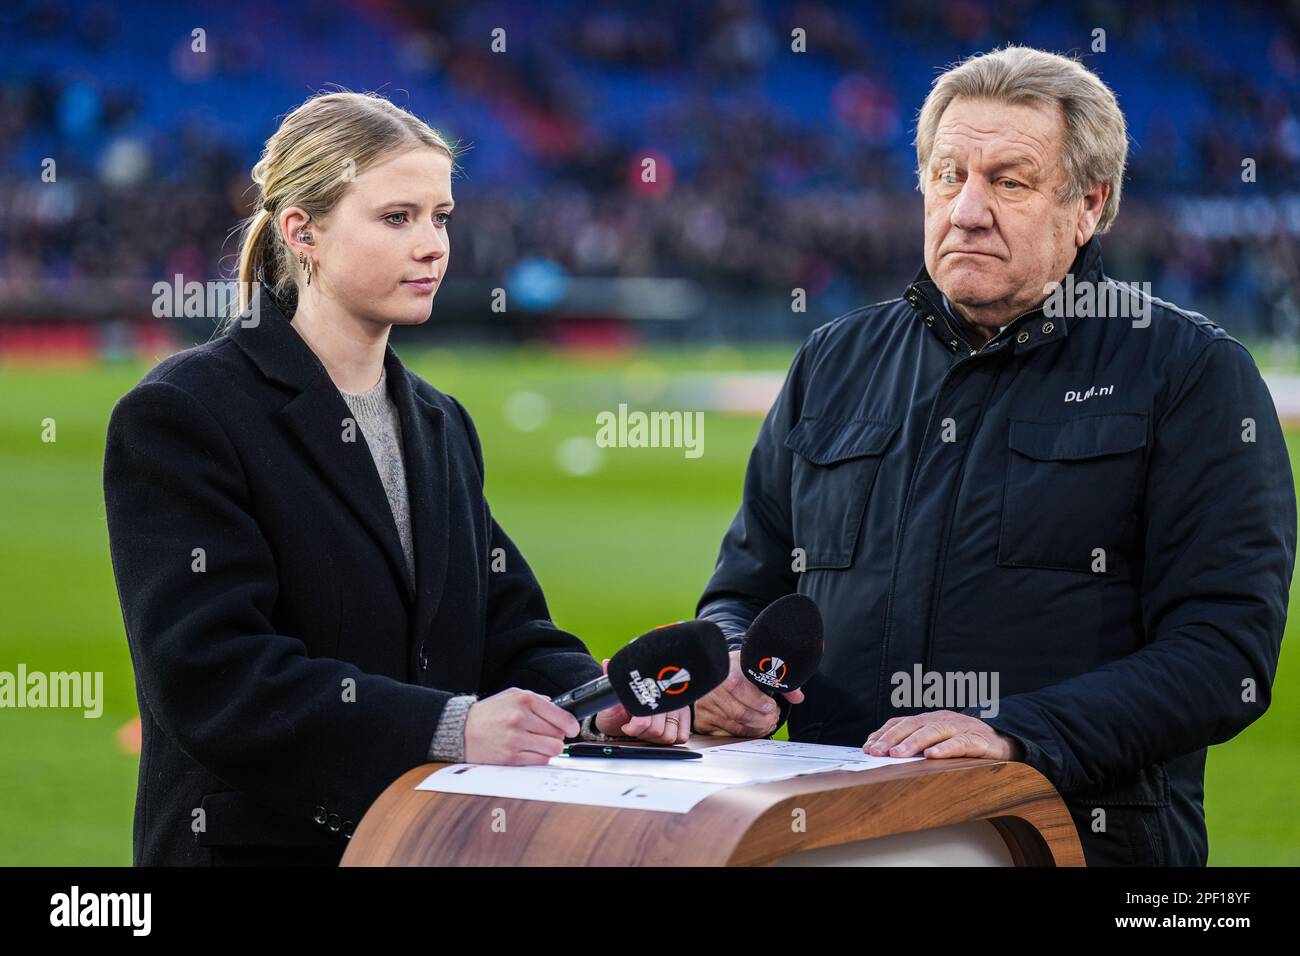 Rotterdam - Noa Vahle, Jan Boskamp during the match between Feyenoord v Shakhtar Donetsk at Stadion Feijenoord De Kuip on 16 March 2023 in Rotterdam, the Netherlands. (Box to Box Pictures/Yannick Verhoeven) Stock Photo